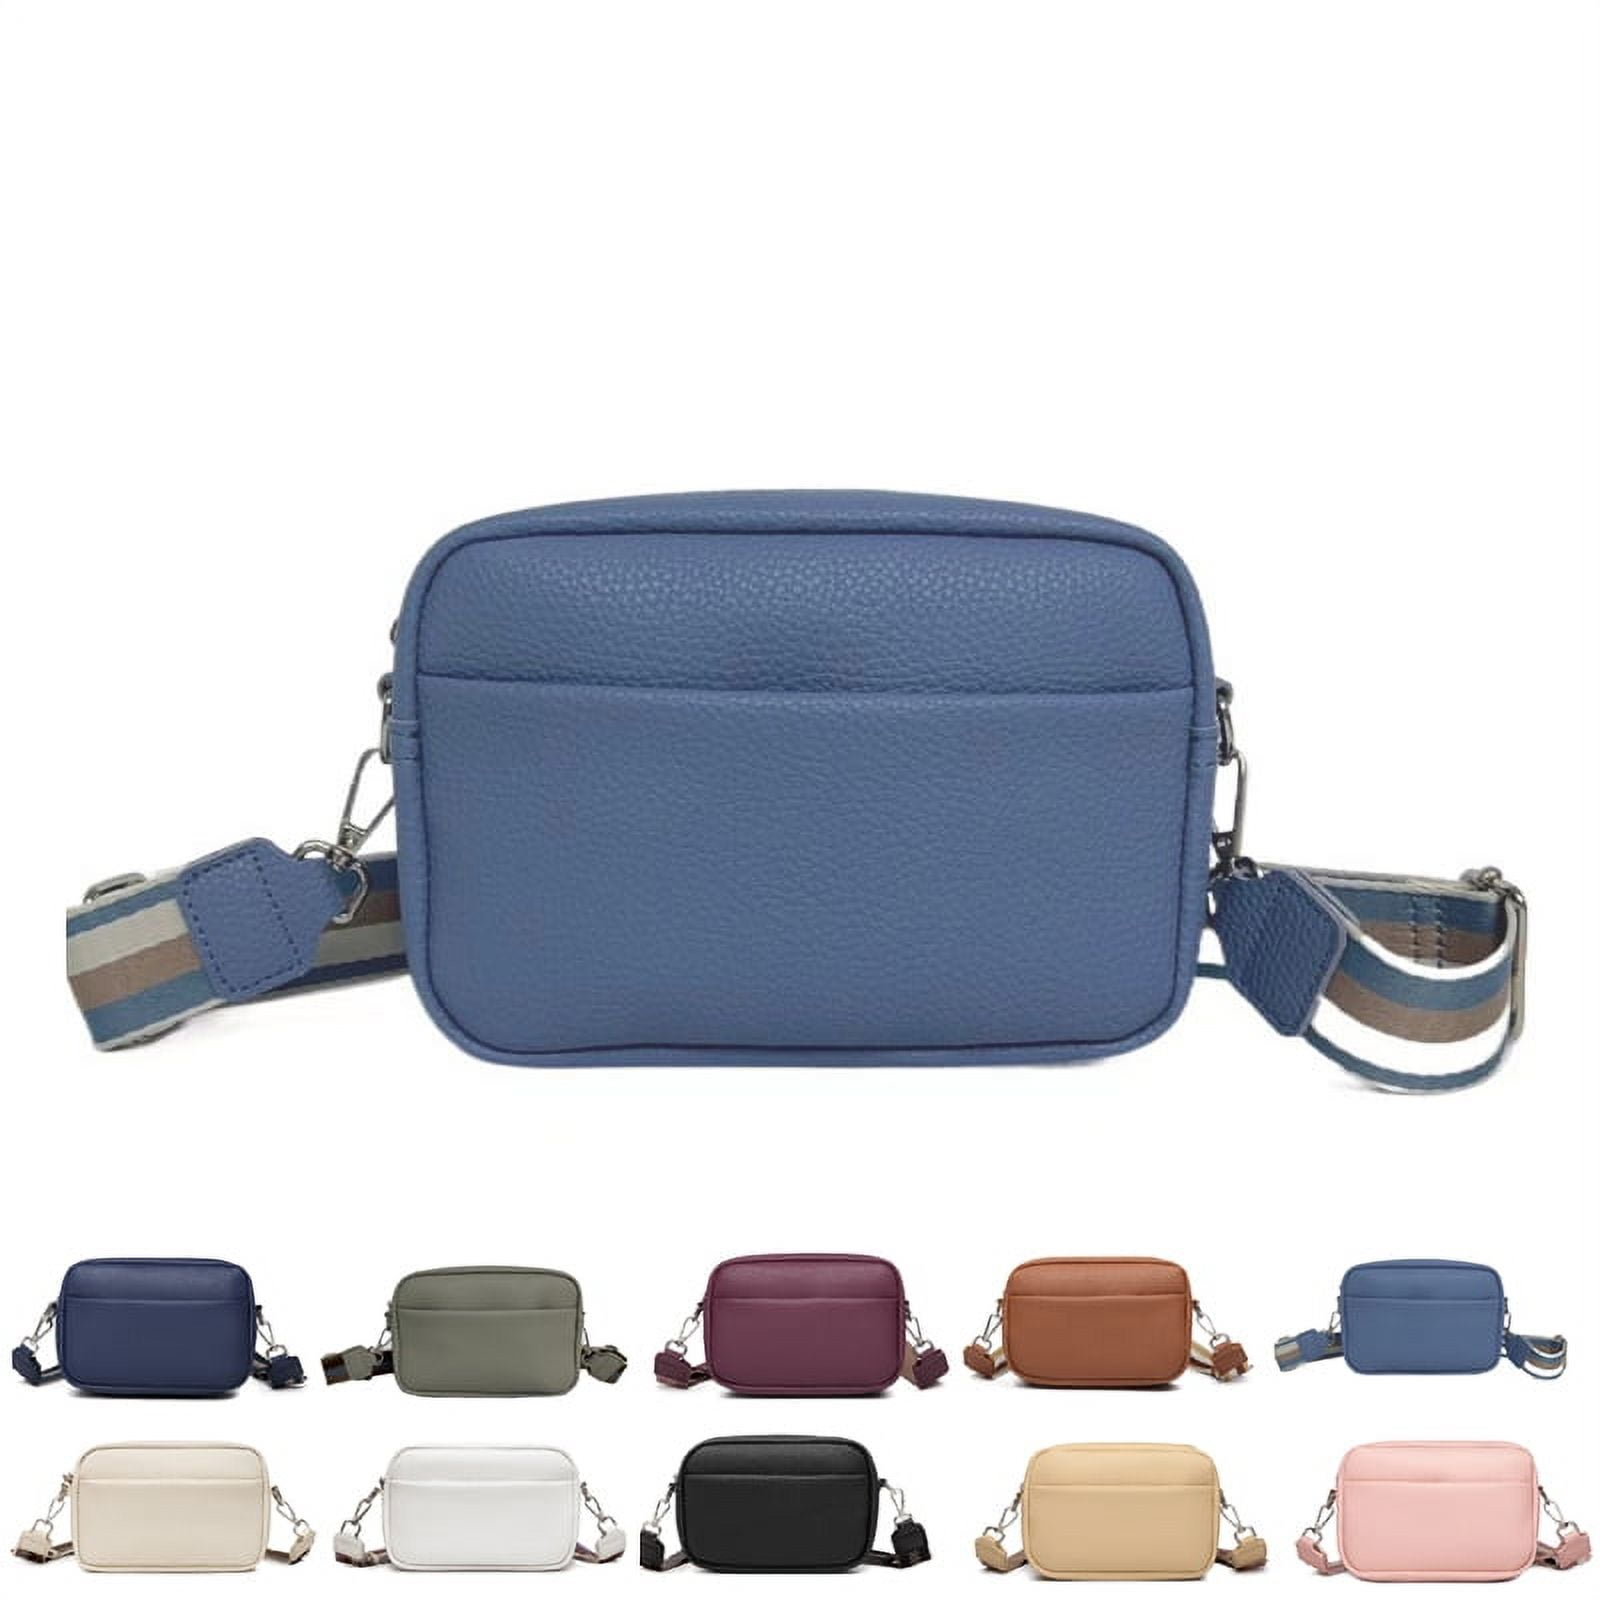 Blue Crossbody Bag With Wide Strap